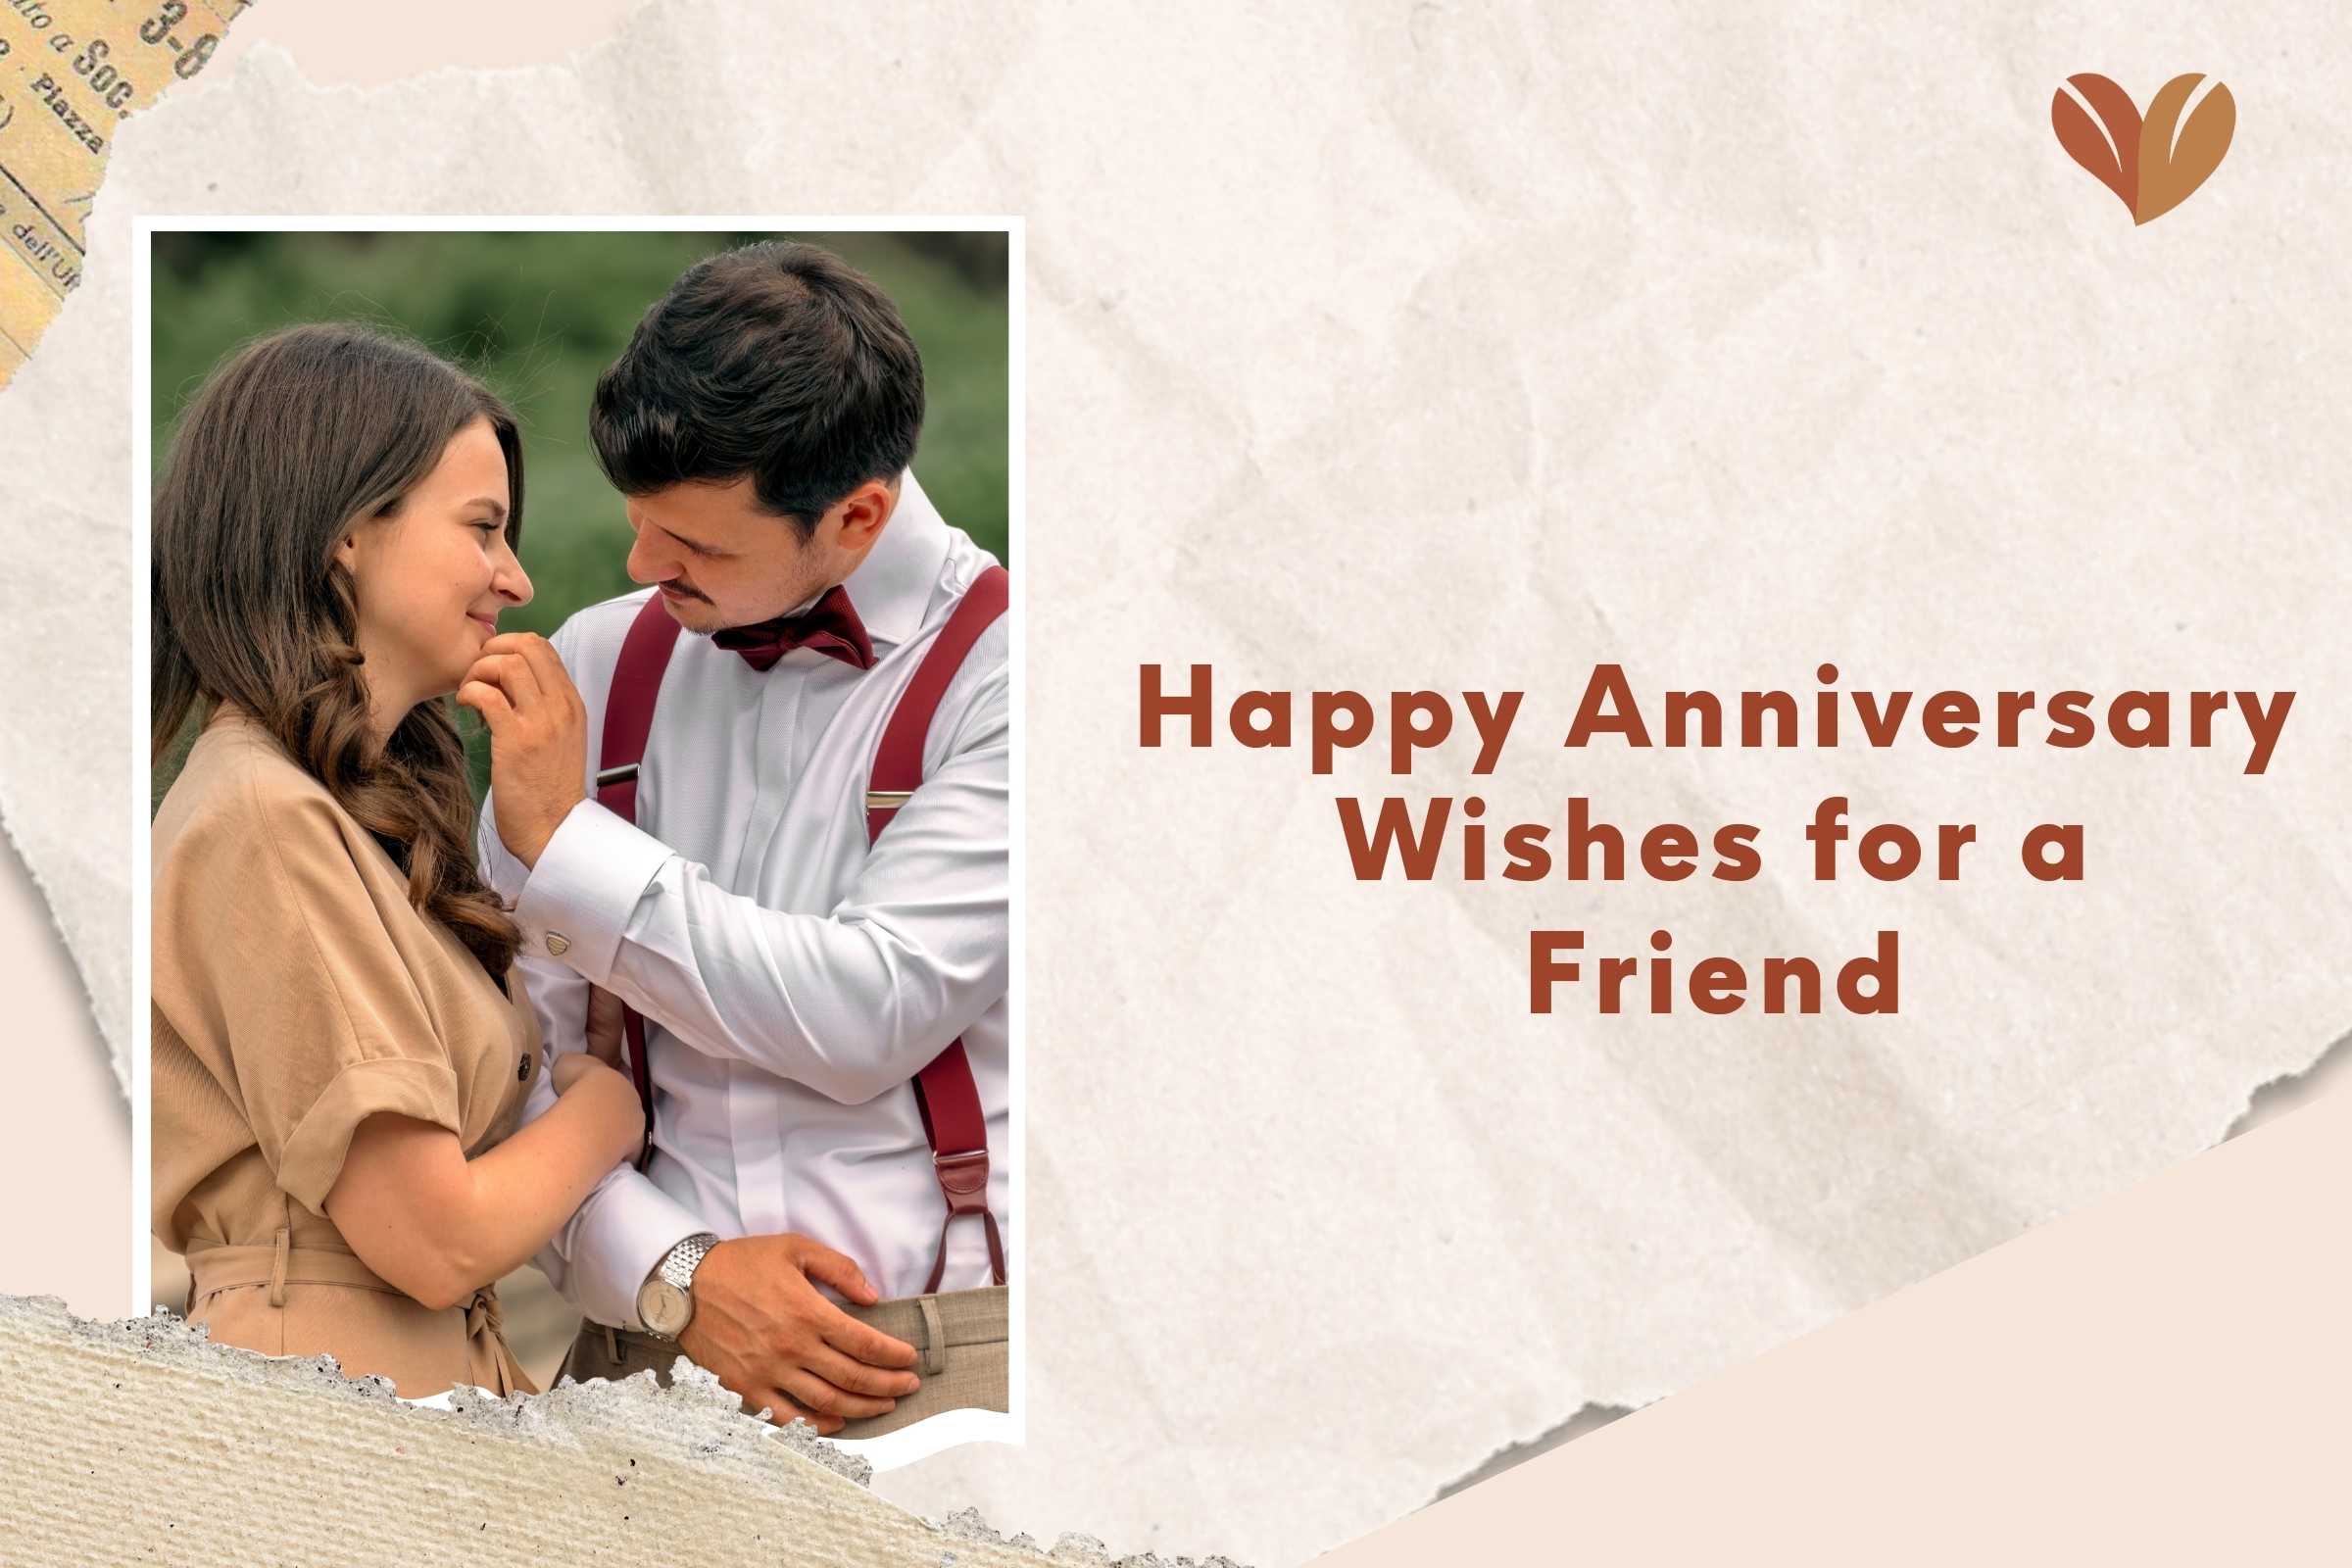 Cherishing love and commitment with meaningful anniversary card messages.